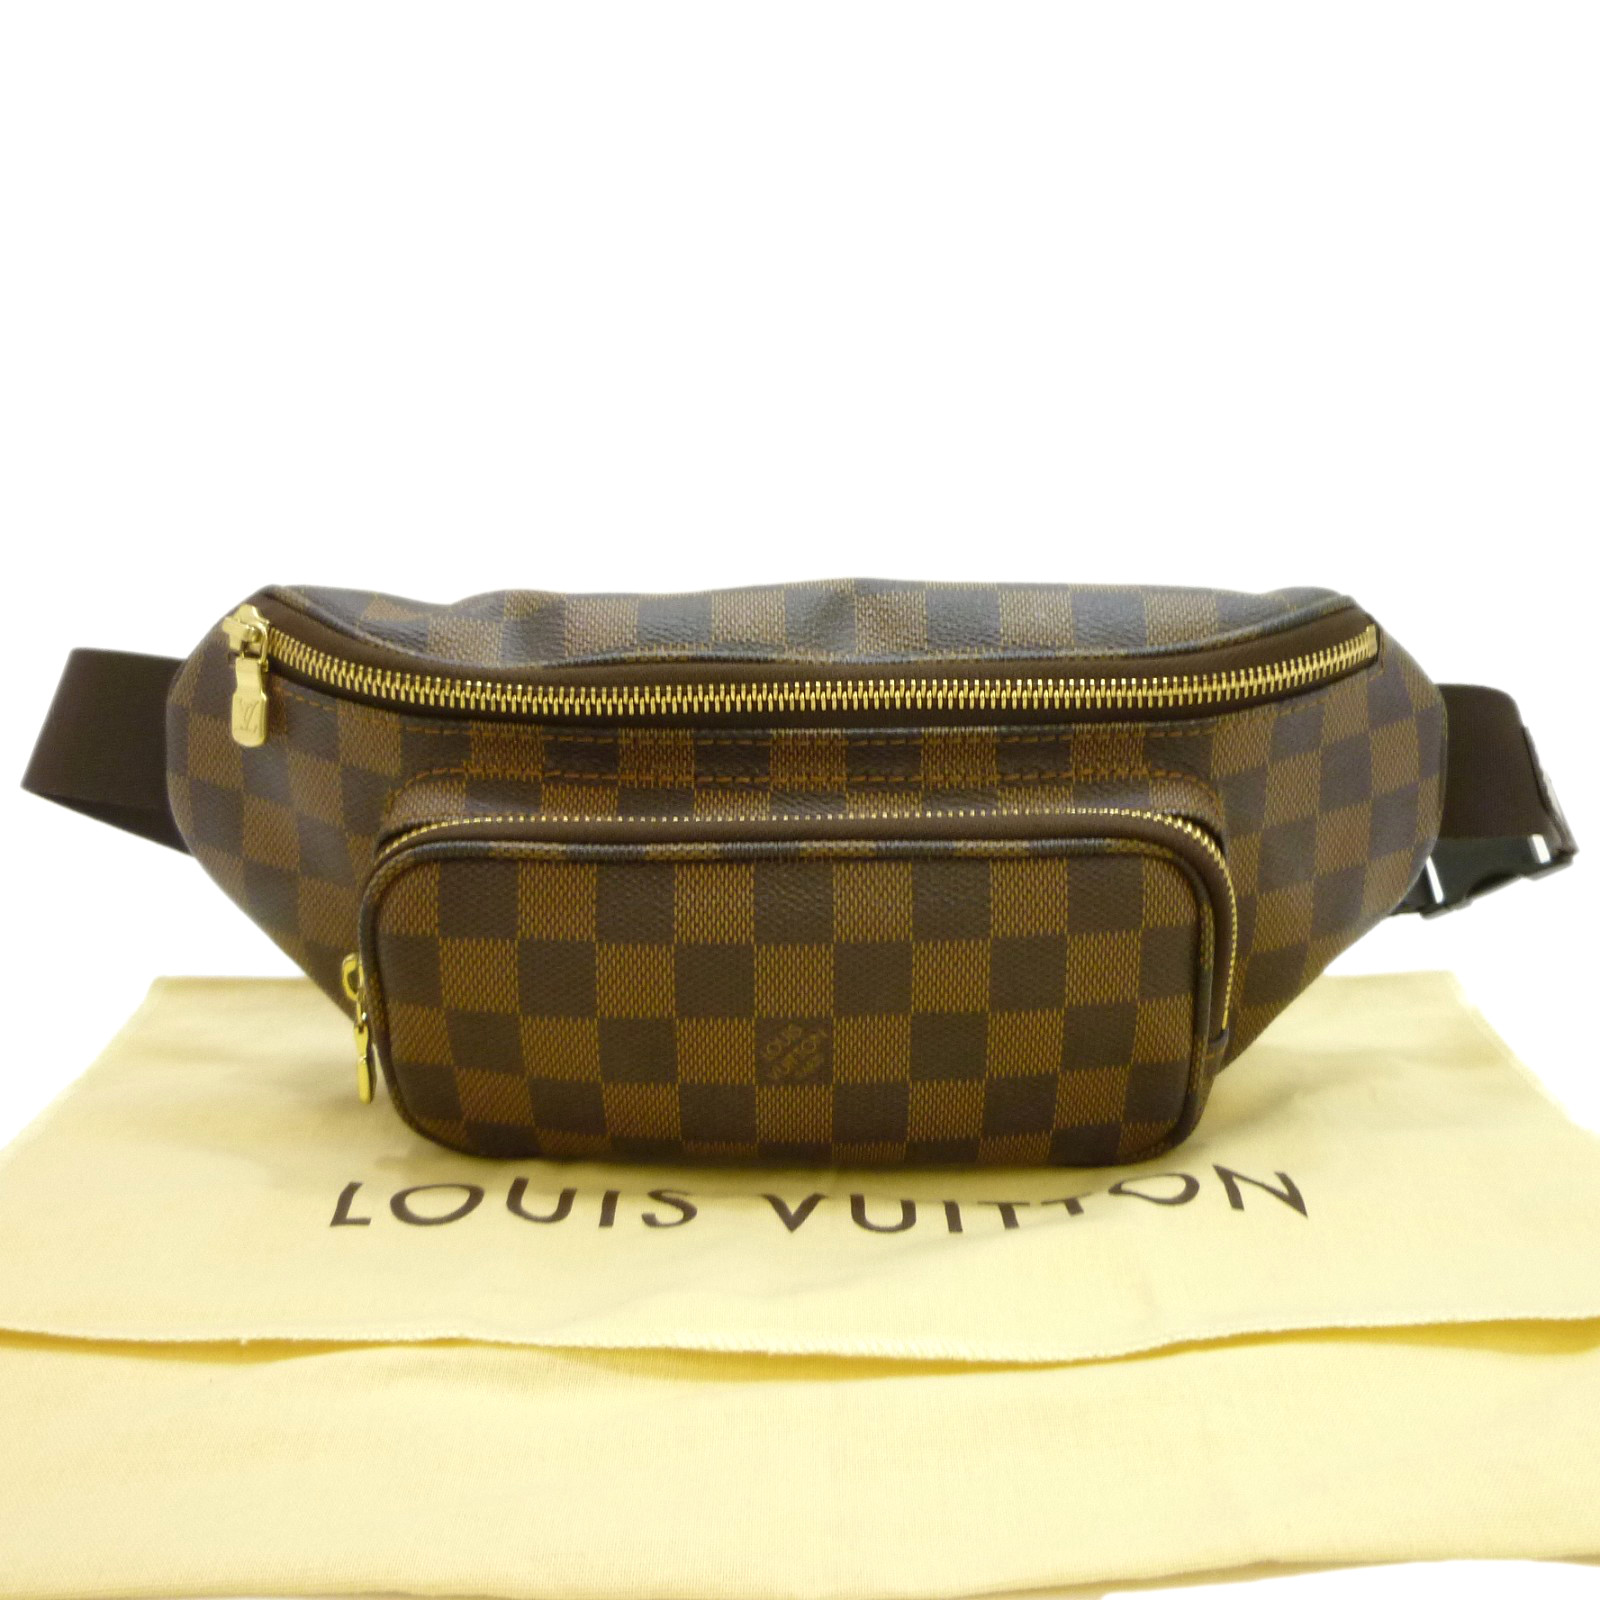 LOUIS VUITTON ルイヴィトン ダミエ メルヴィール N51172 ボディバッグ 